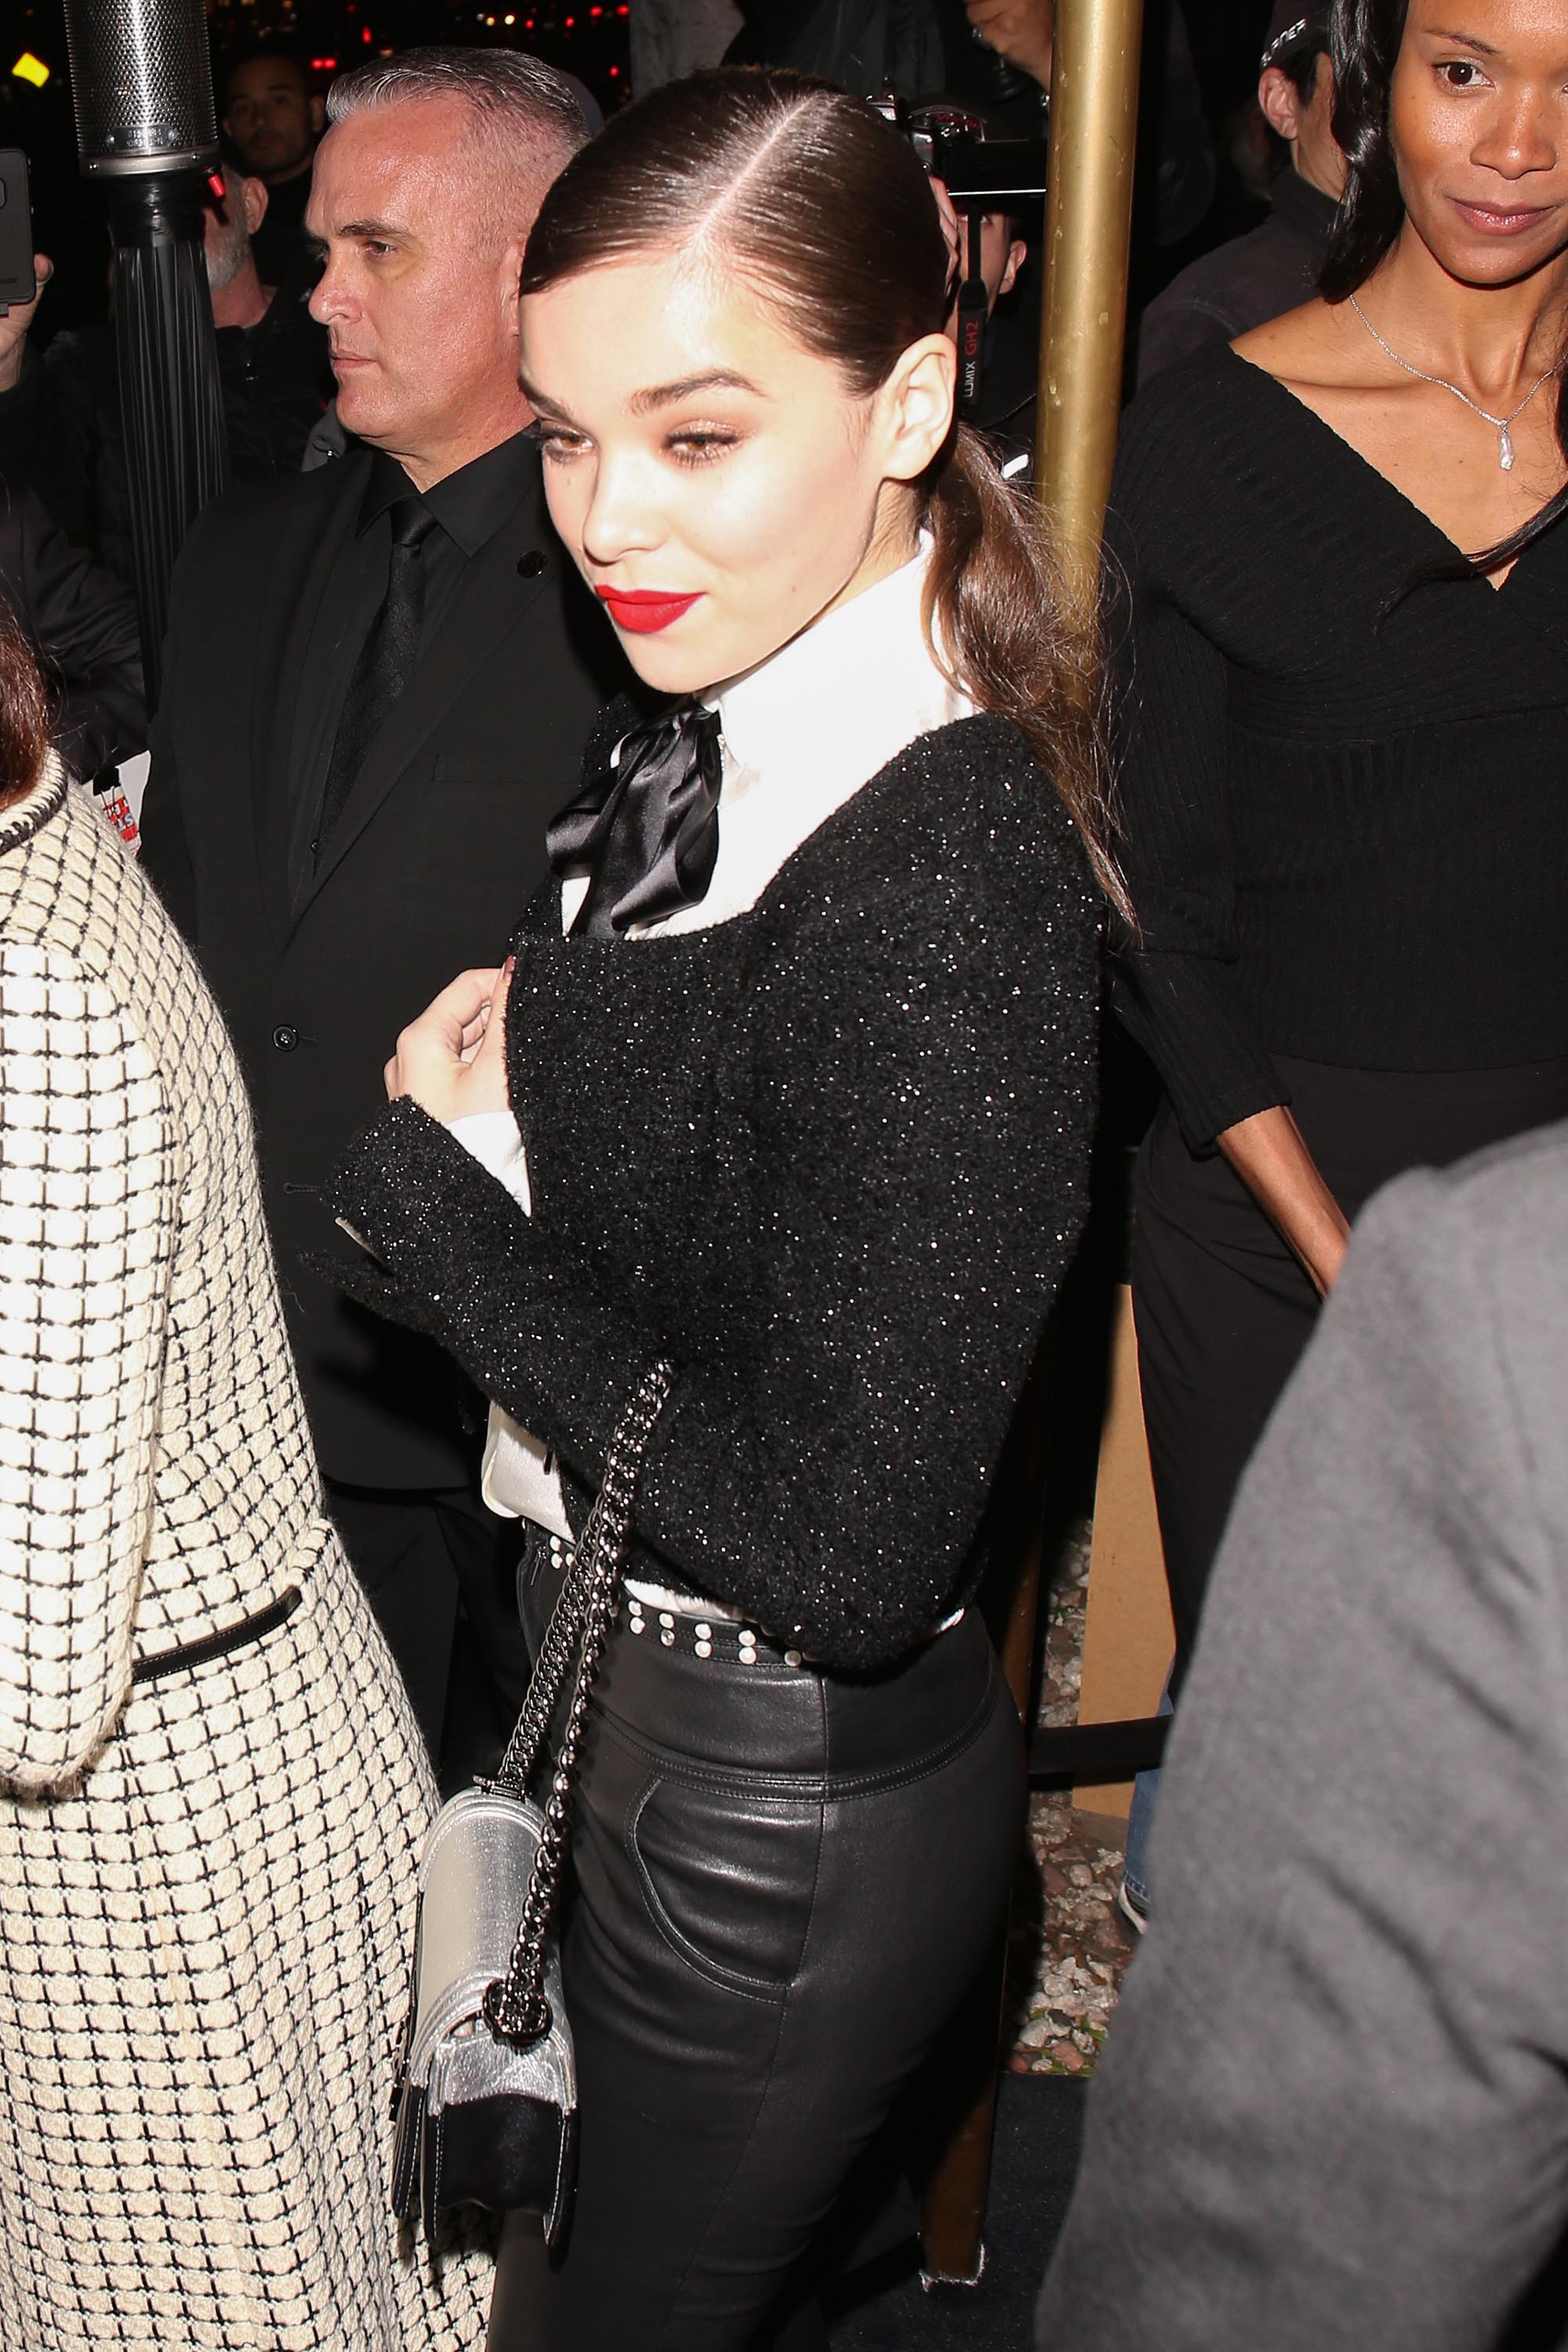 Hailee Steinfeld attends the Charles Finch and CHANEL Pre-Oscar Awards Dinner